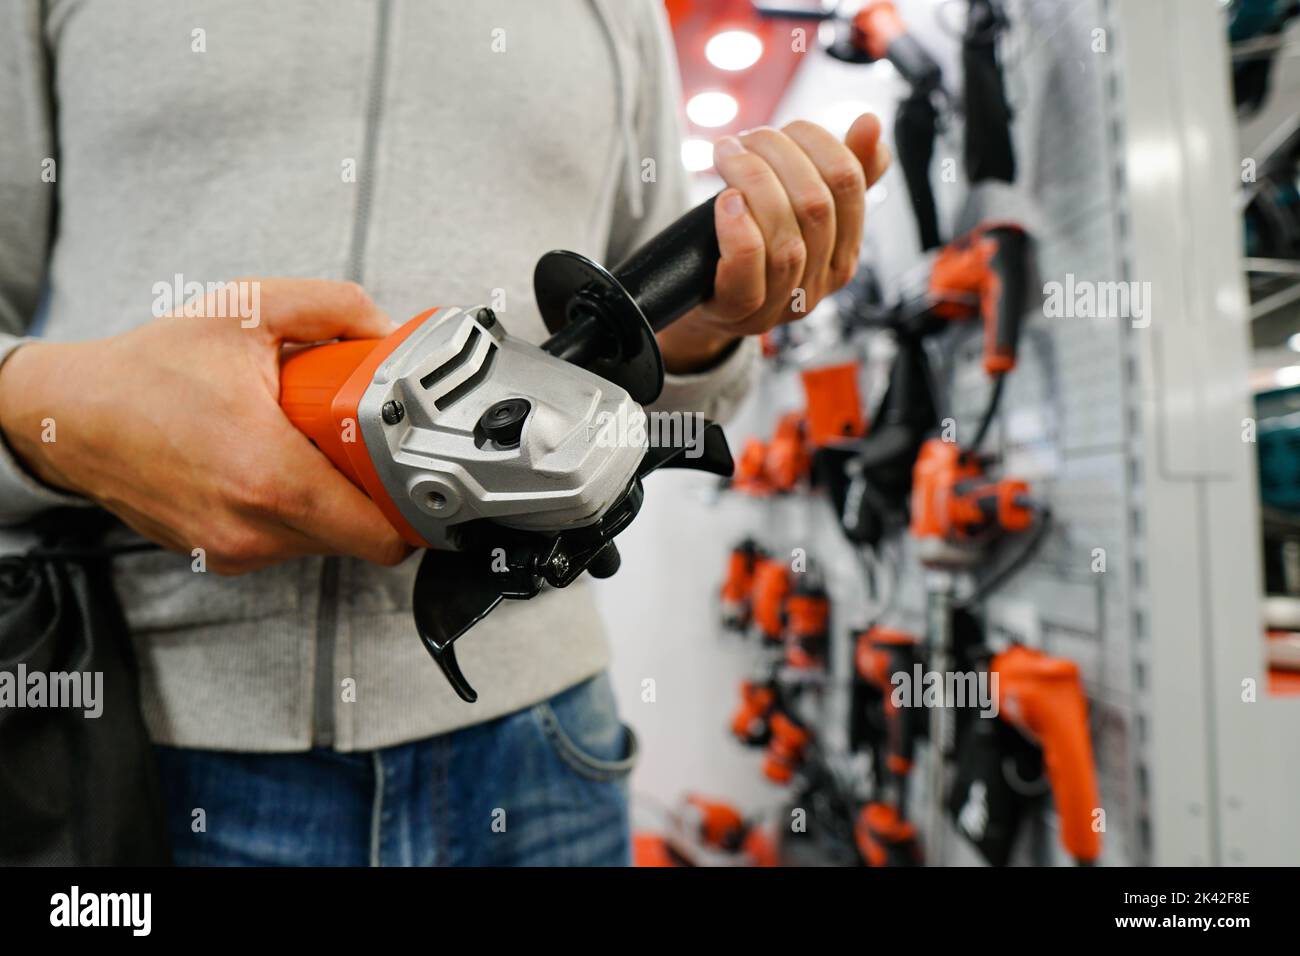 Cloe up of man is looking on new angle grinder at store. Stock Photo